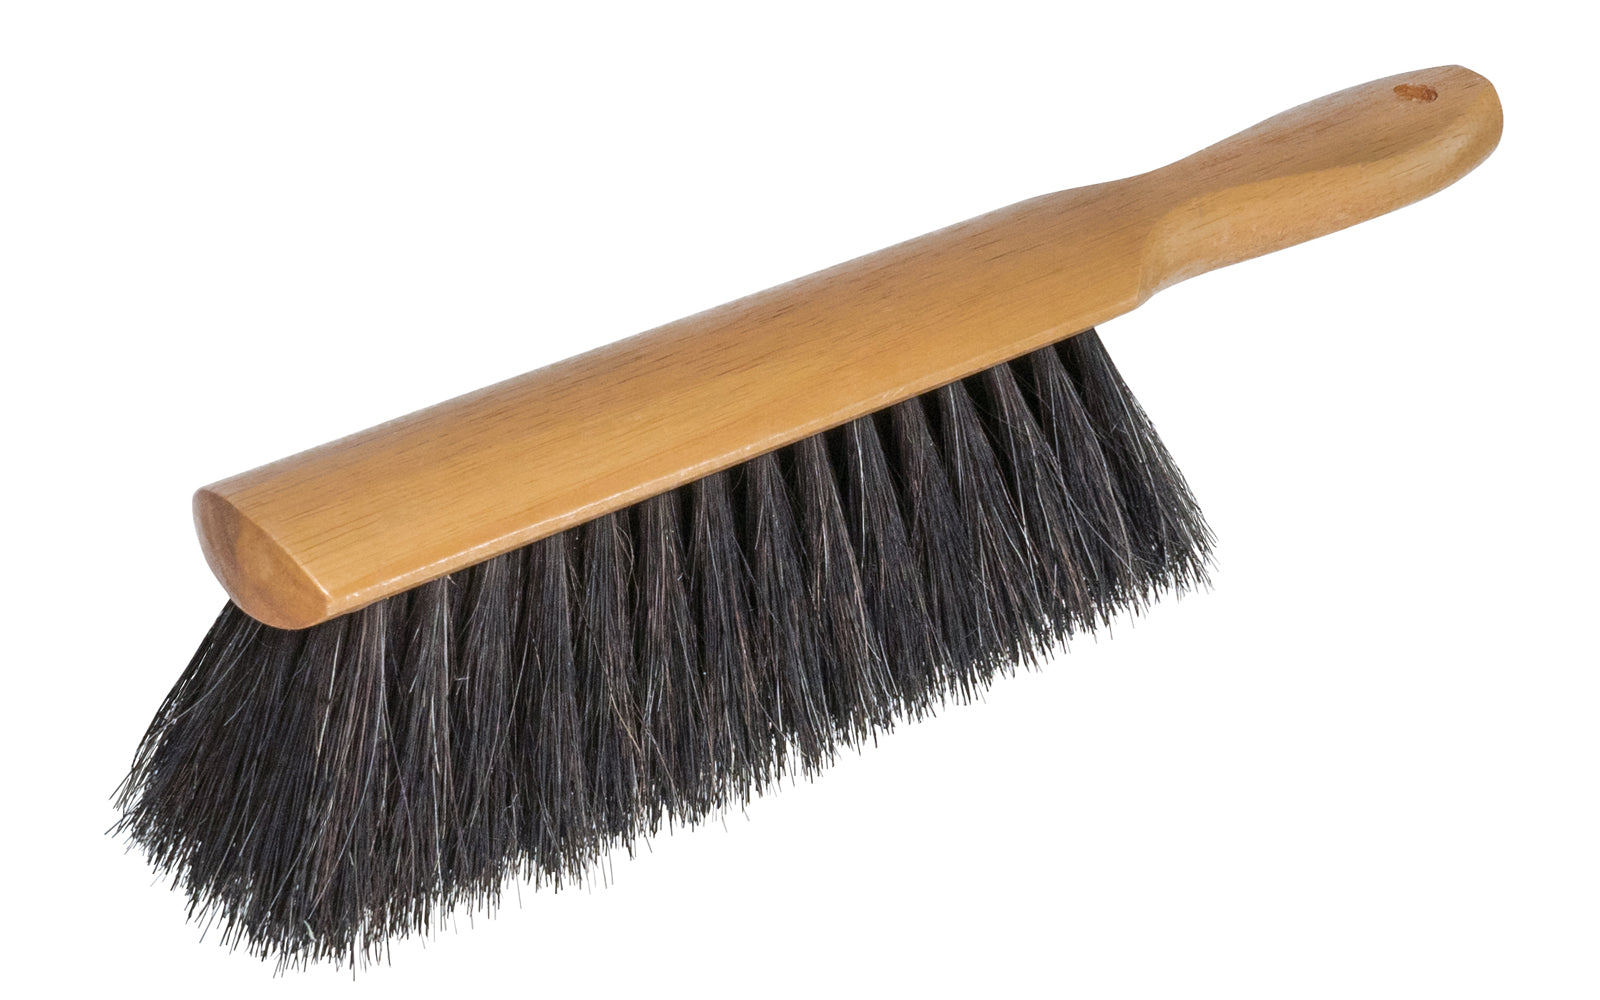 Bench Brush ~ Horsehair & Tampico Bristles - Magnolia Counter Duster Model No. 53 ~ Well-made duster ~ Bristles are staple set in clear lacquered hardwood block ~ Excellent for dusting, cleaning counters, & workshop area ~ Great for use on delicate & polished surfaces - will not scratch ~ Made in USA